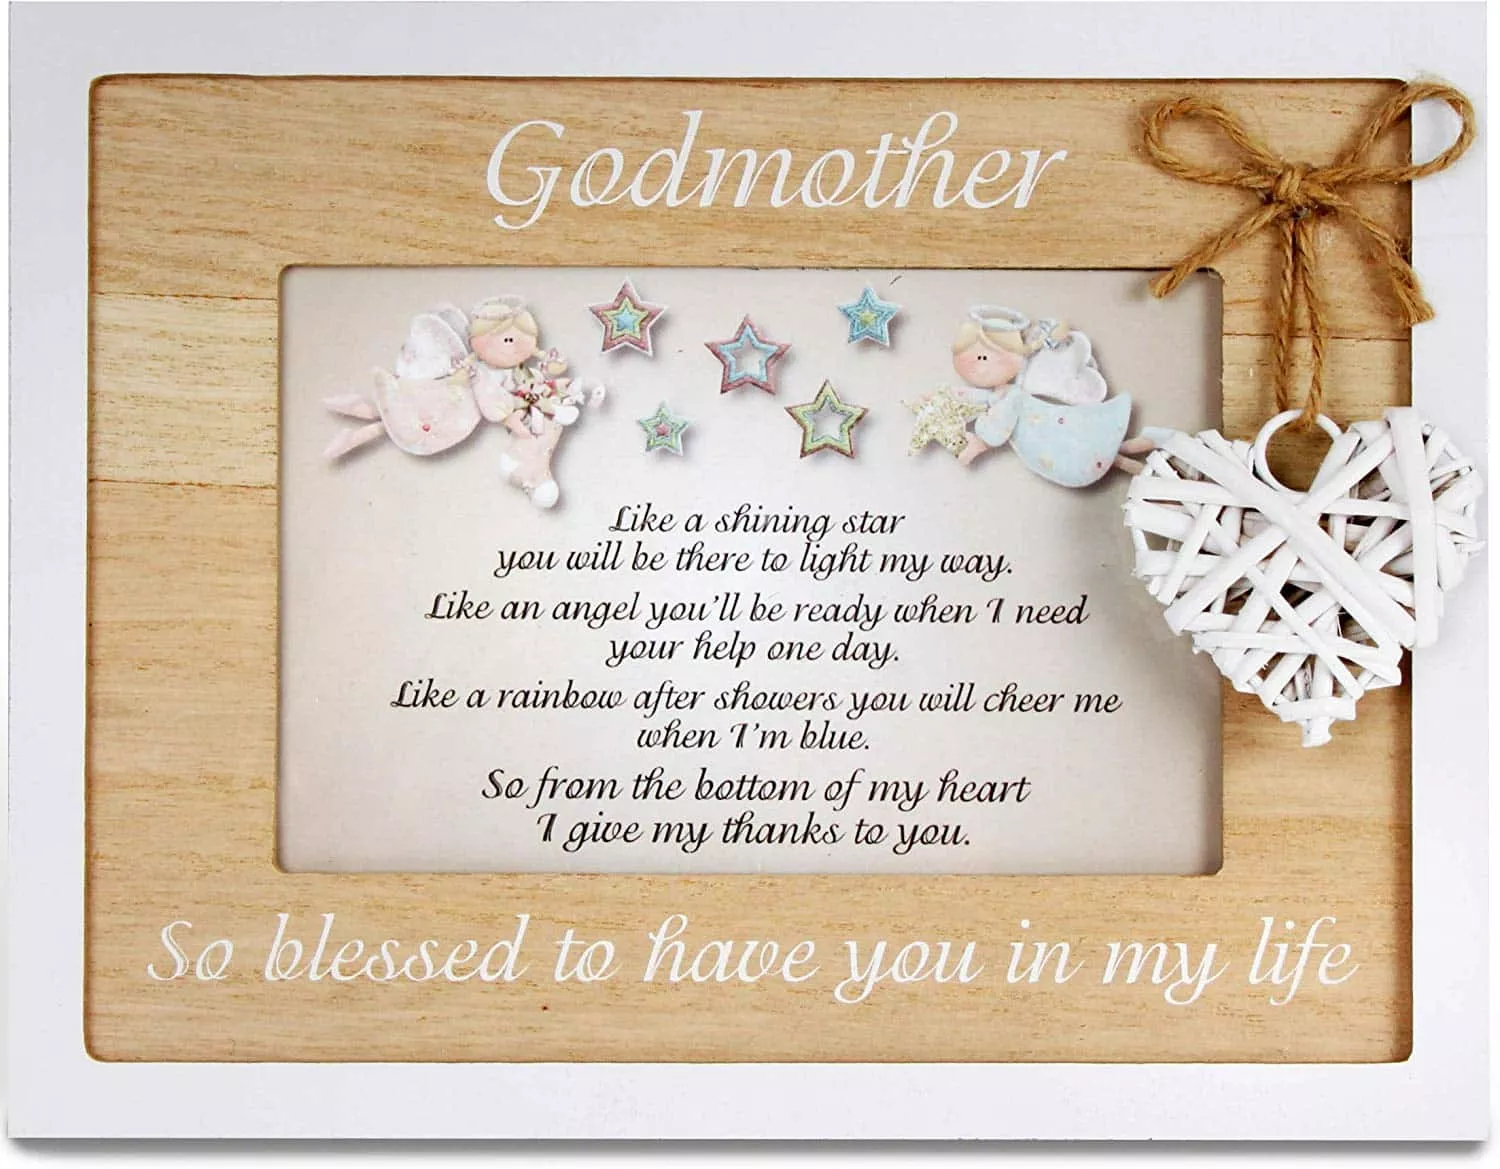 Best Godmother Gifts 2023: Traditional Godmother Picture Frame 2023